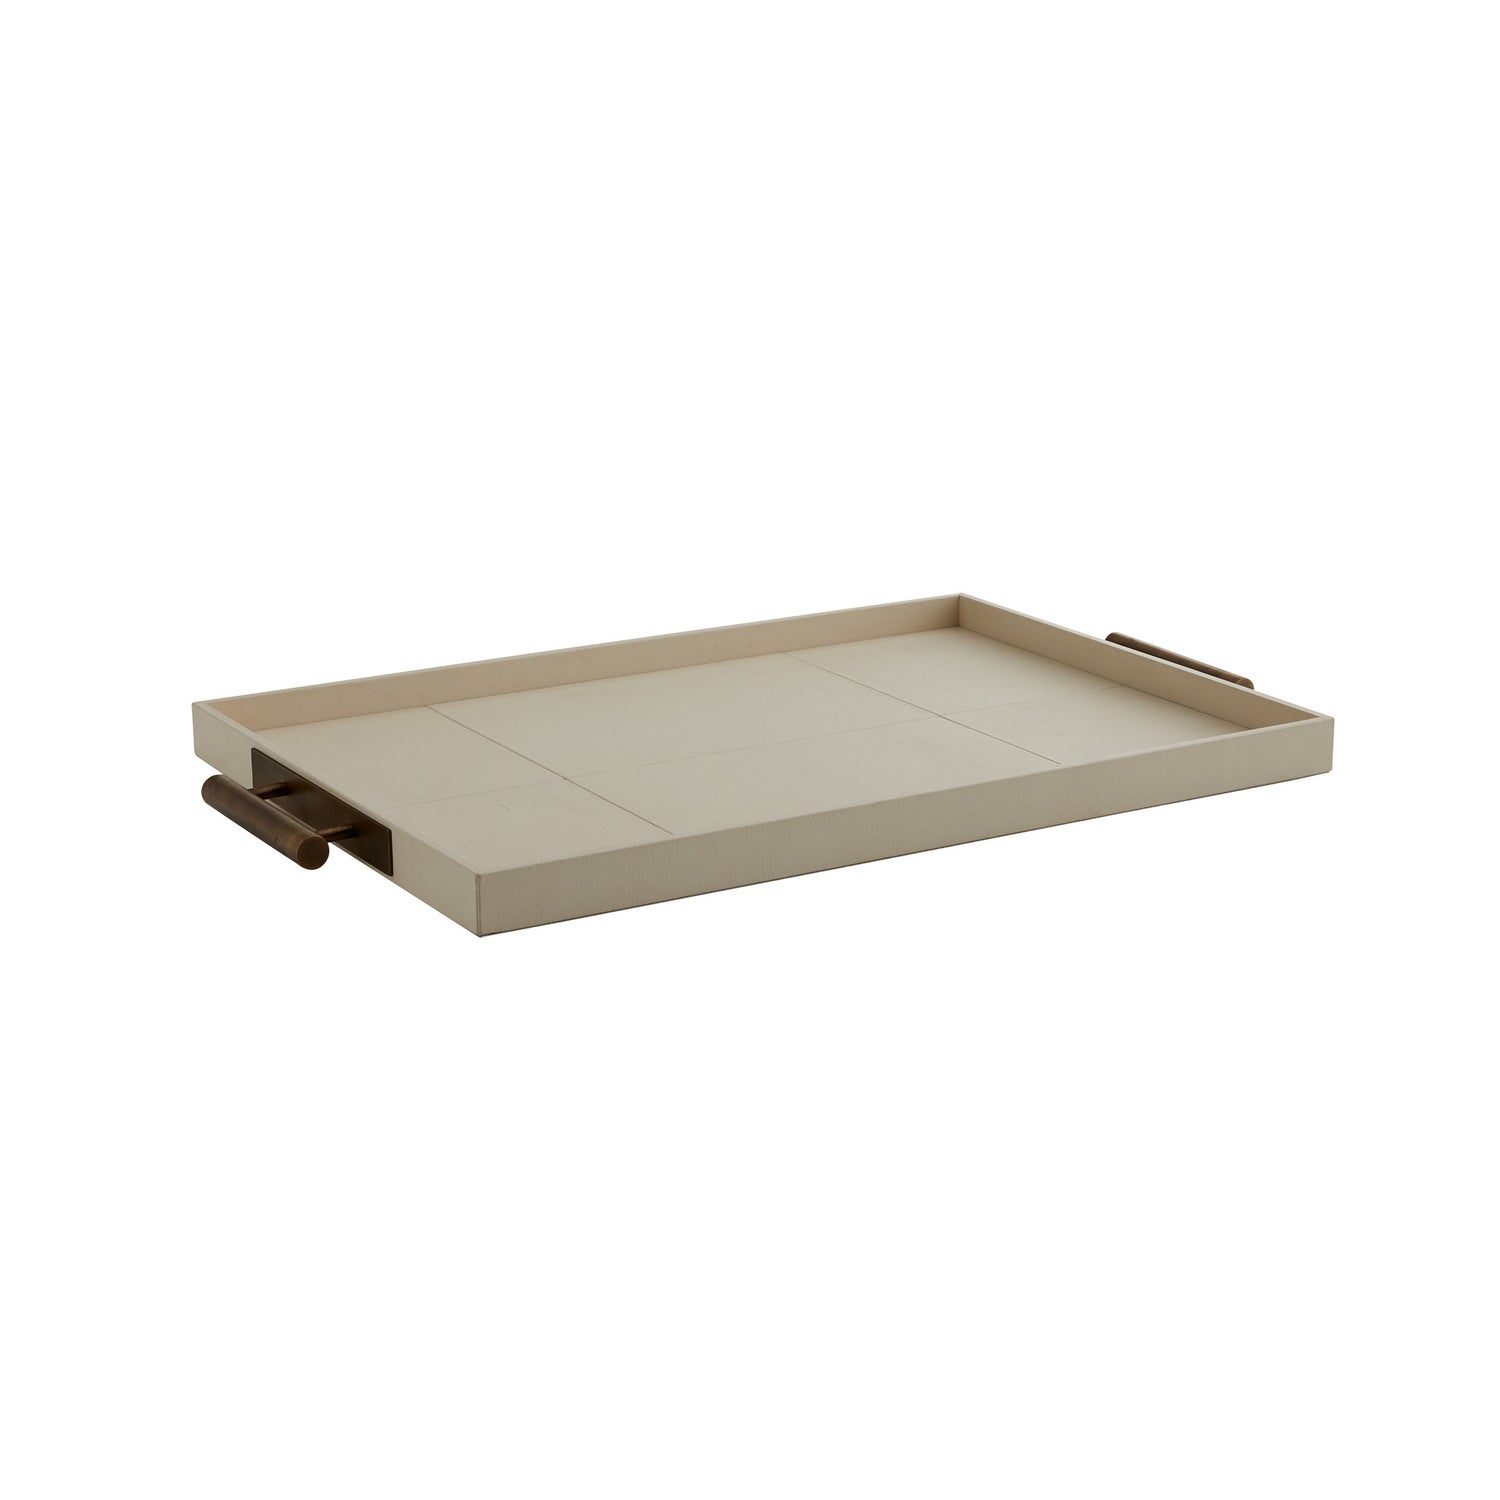 Tray from the Maxwell collection in Ivory finish